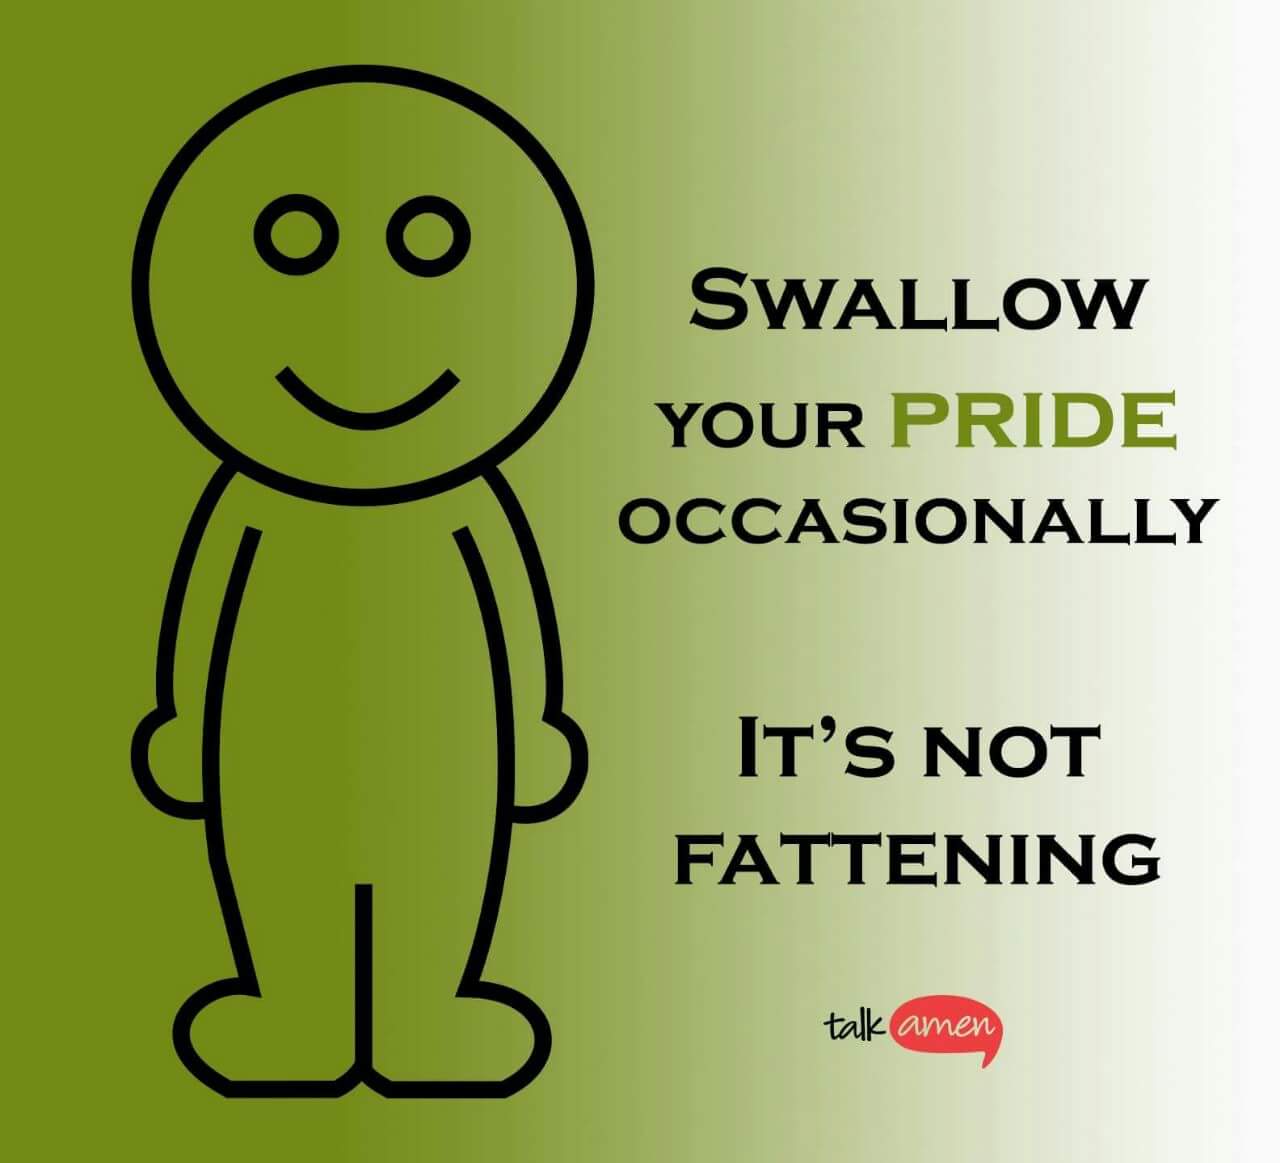 Swallow your pride occasionally, it's not fattening!!! – 8wdee